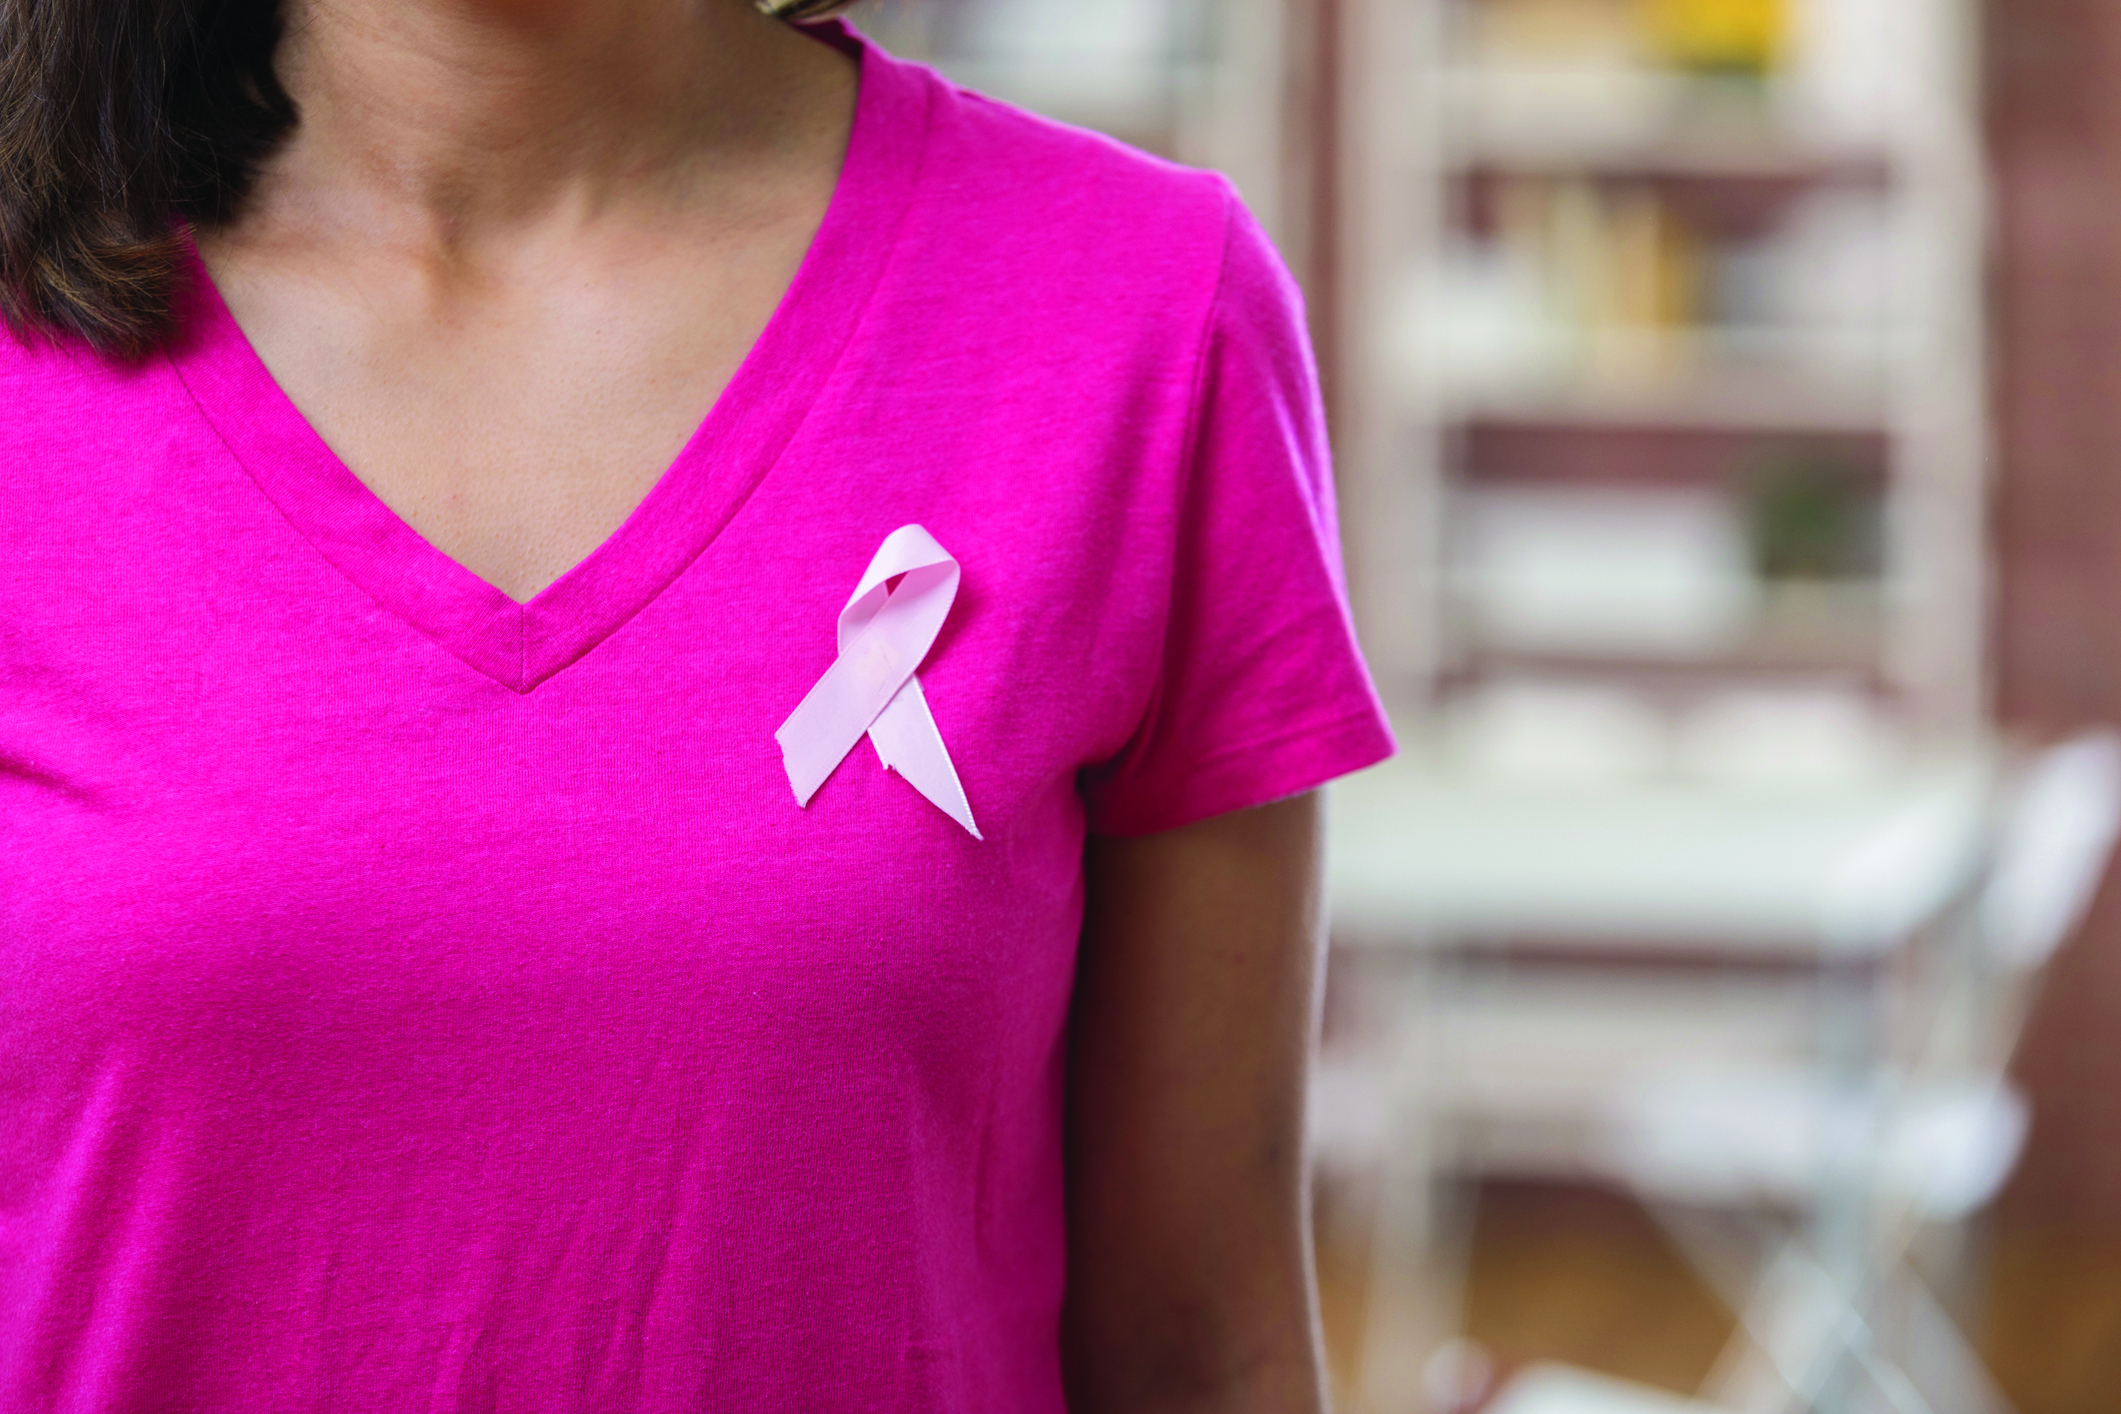 woman in pink top wearing pink ribbon to denote breast cancer